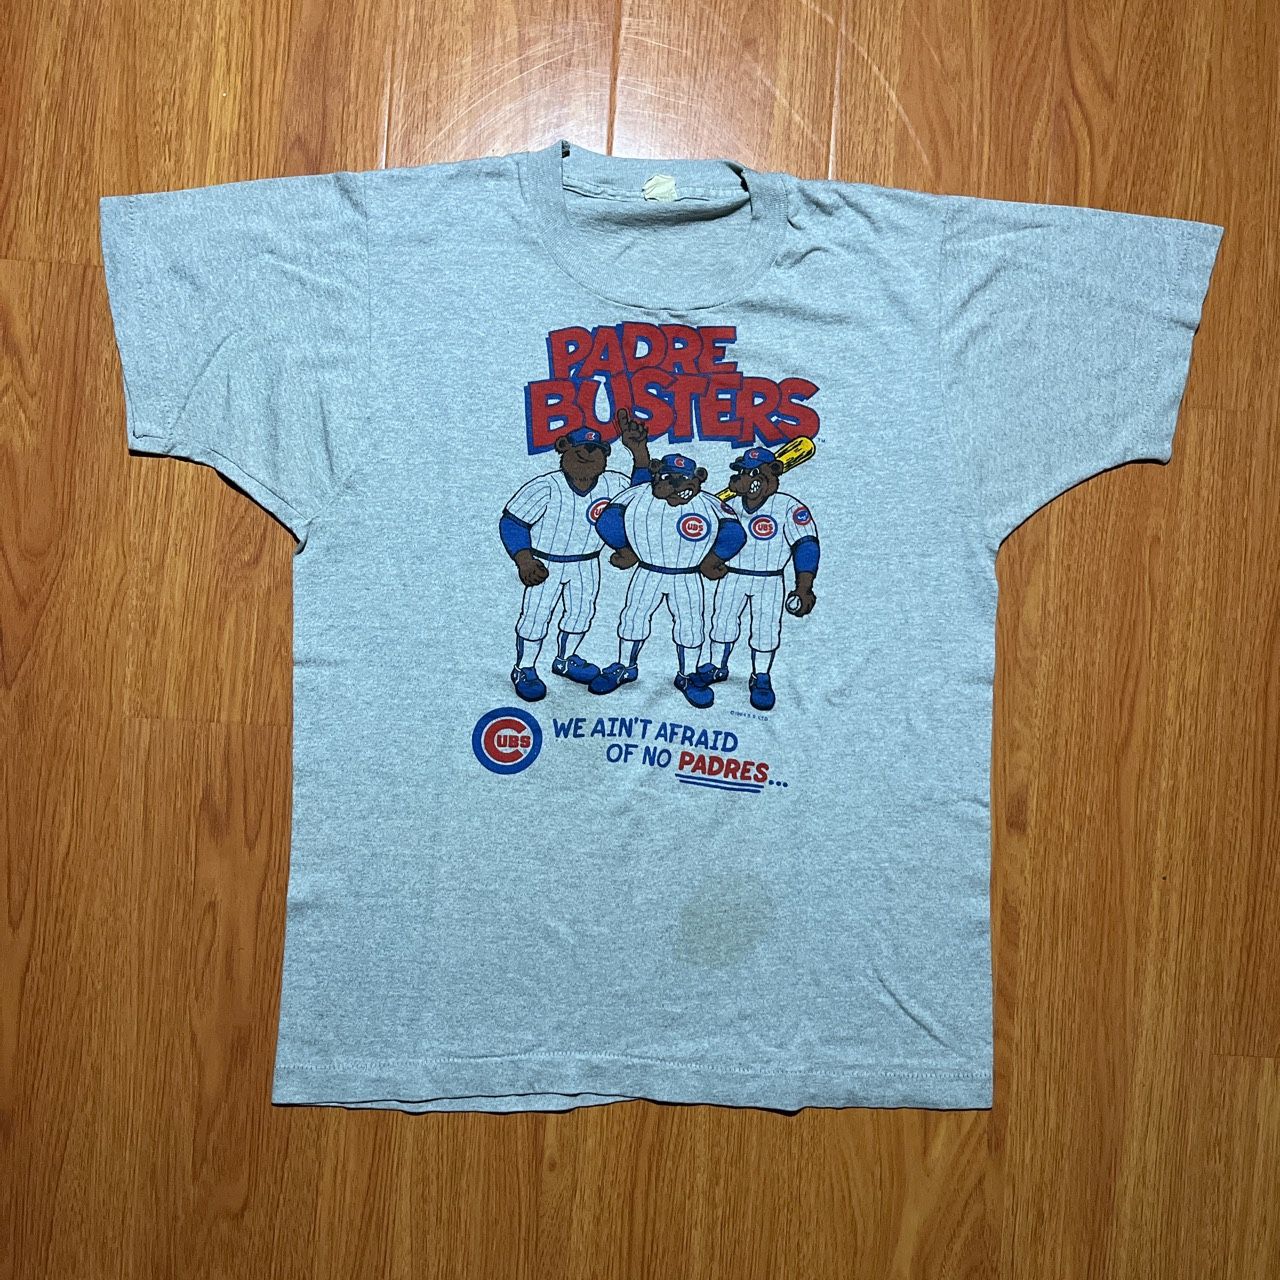 Vintage 1984 screen stars Chicago Cubs Padre busters bear tshirt  Size 